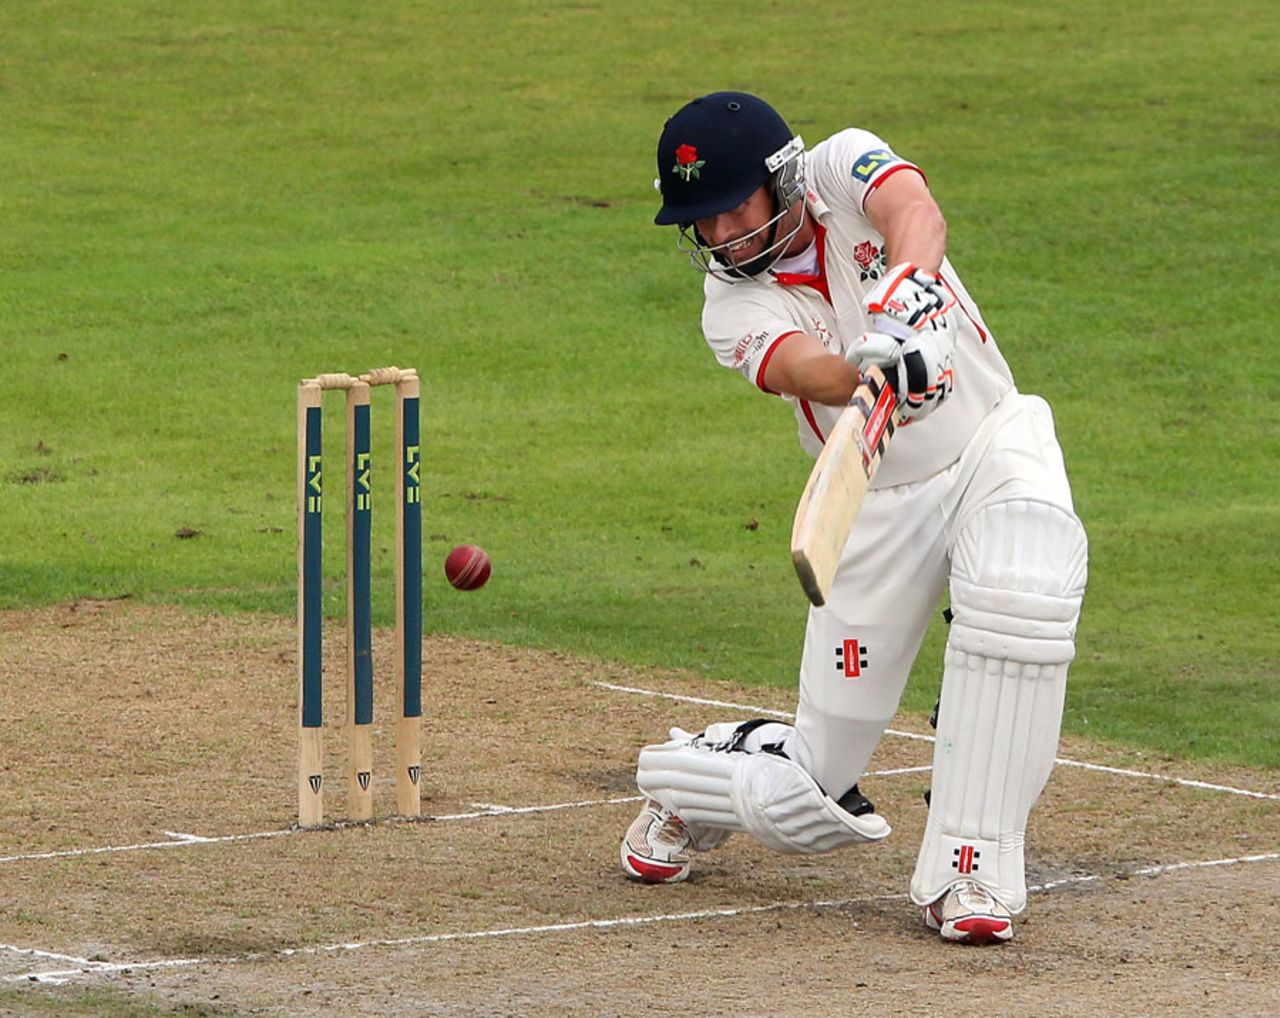 Paul Horton drives on the way to a century, Lancashire v Leicestershire, County Championship, Division Two, Old Trafford, 2nd day, September 12, 2013